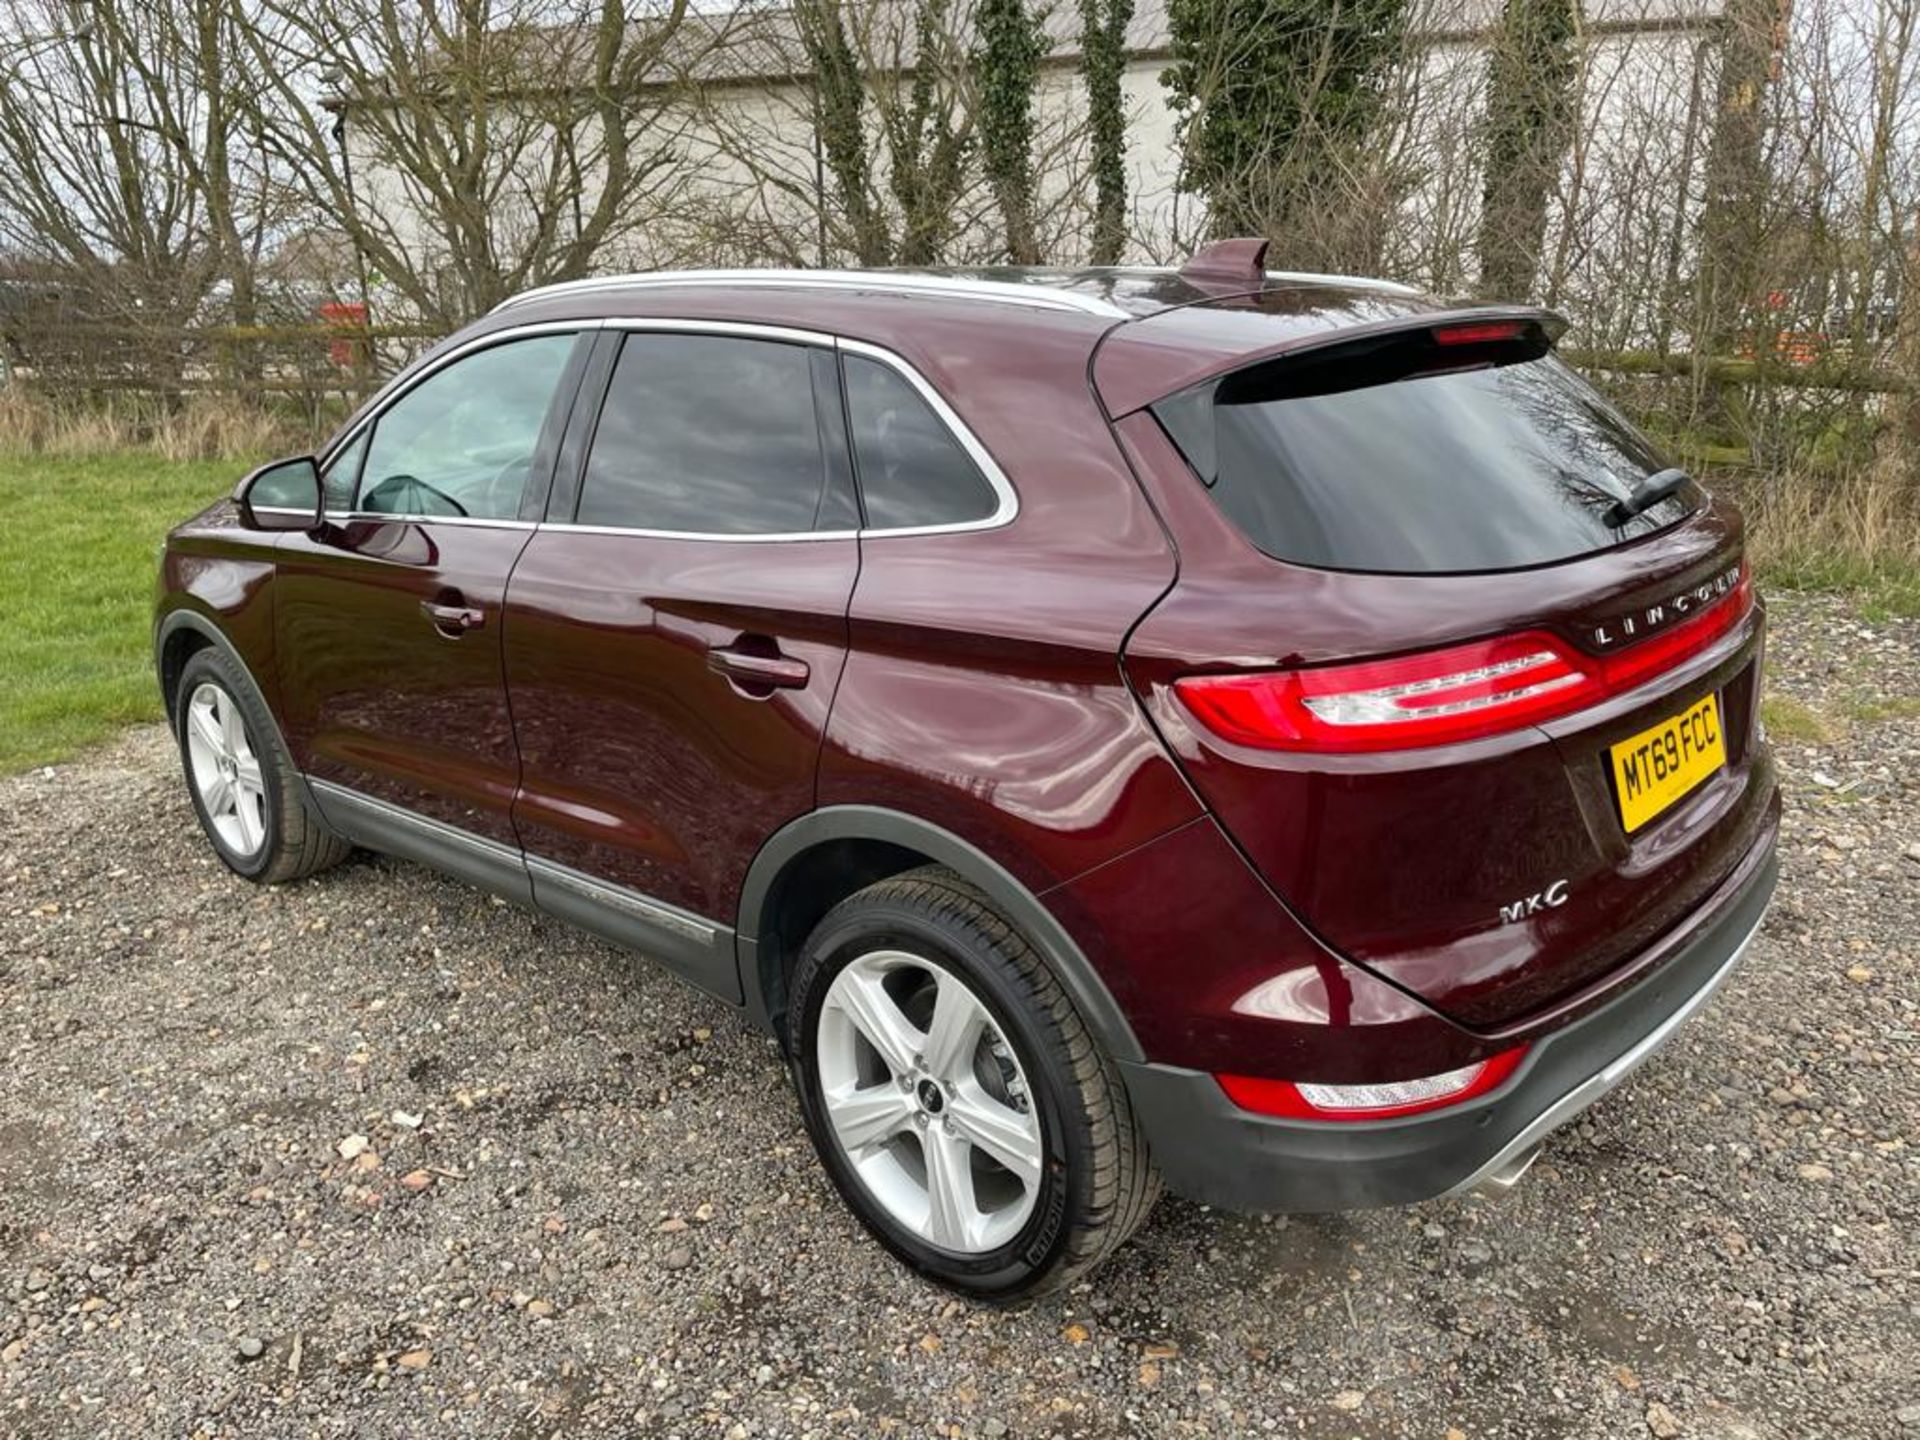 69 PLATE, PRE-REGISTERED 2017MY, LINCOLN MKC PREMIER 2.0L TURBO PETROL ECOBOOST (200bhp) AUTOMATIC - Image 5 of 14